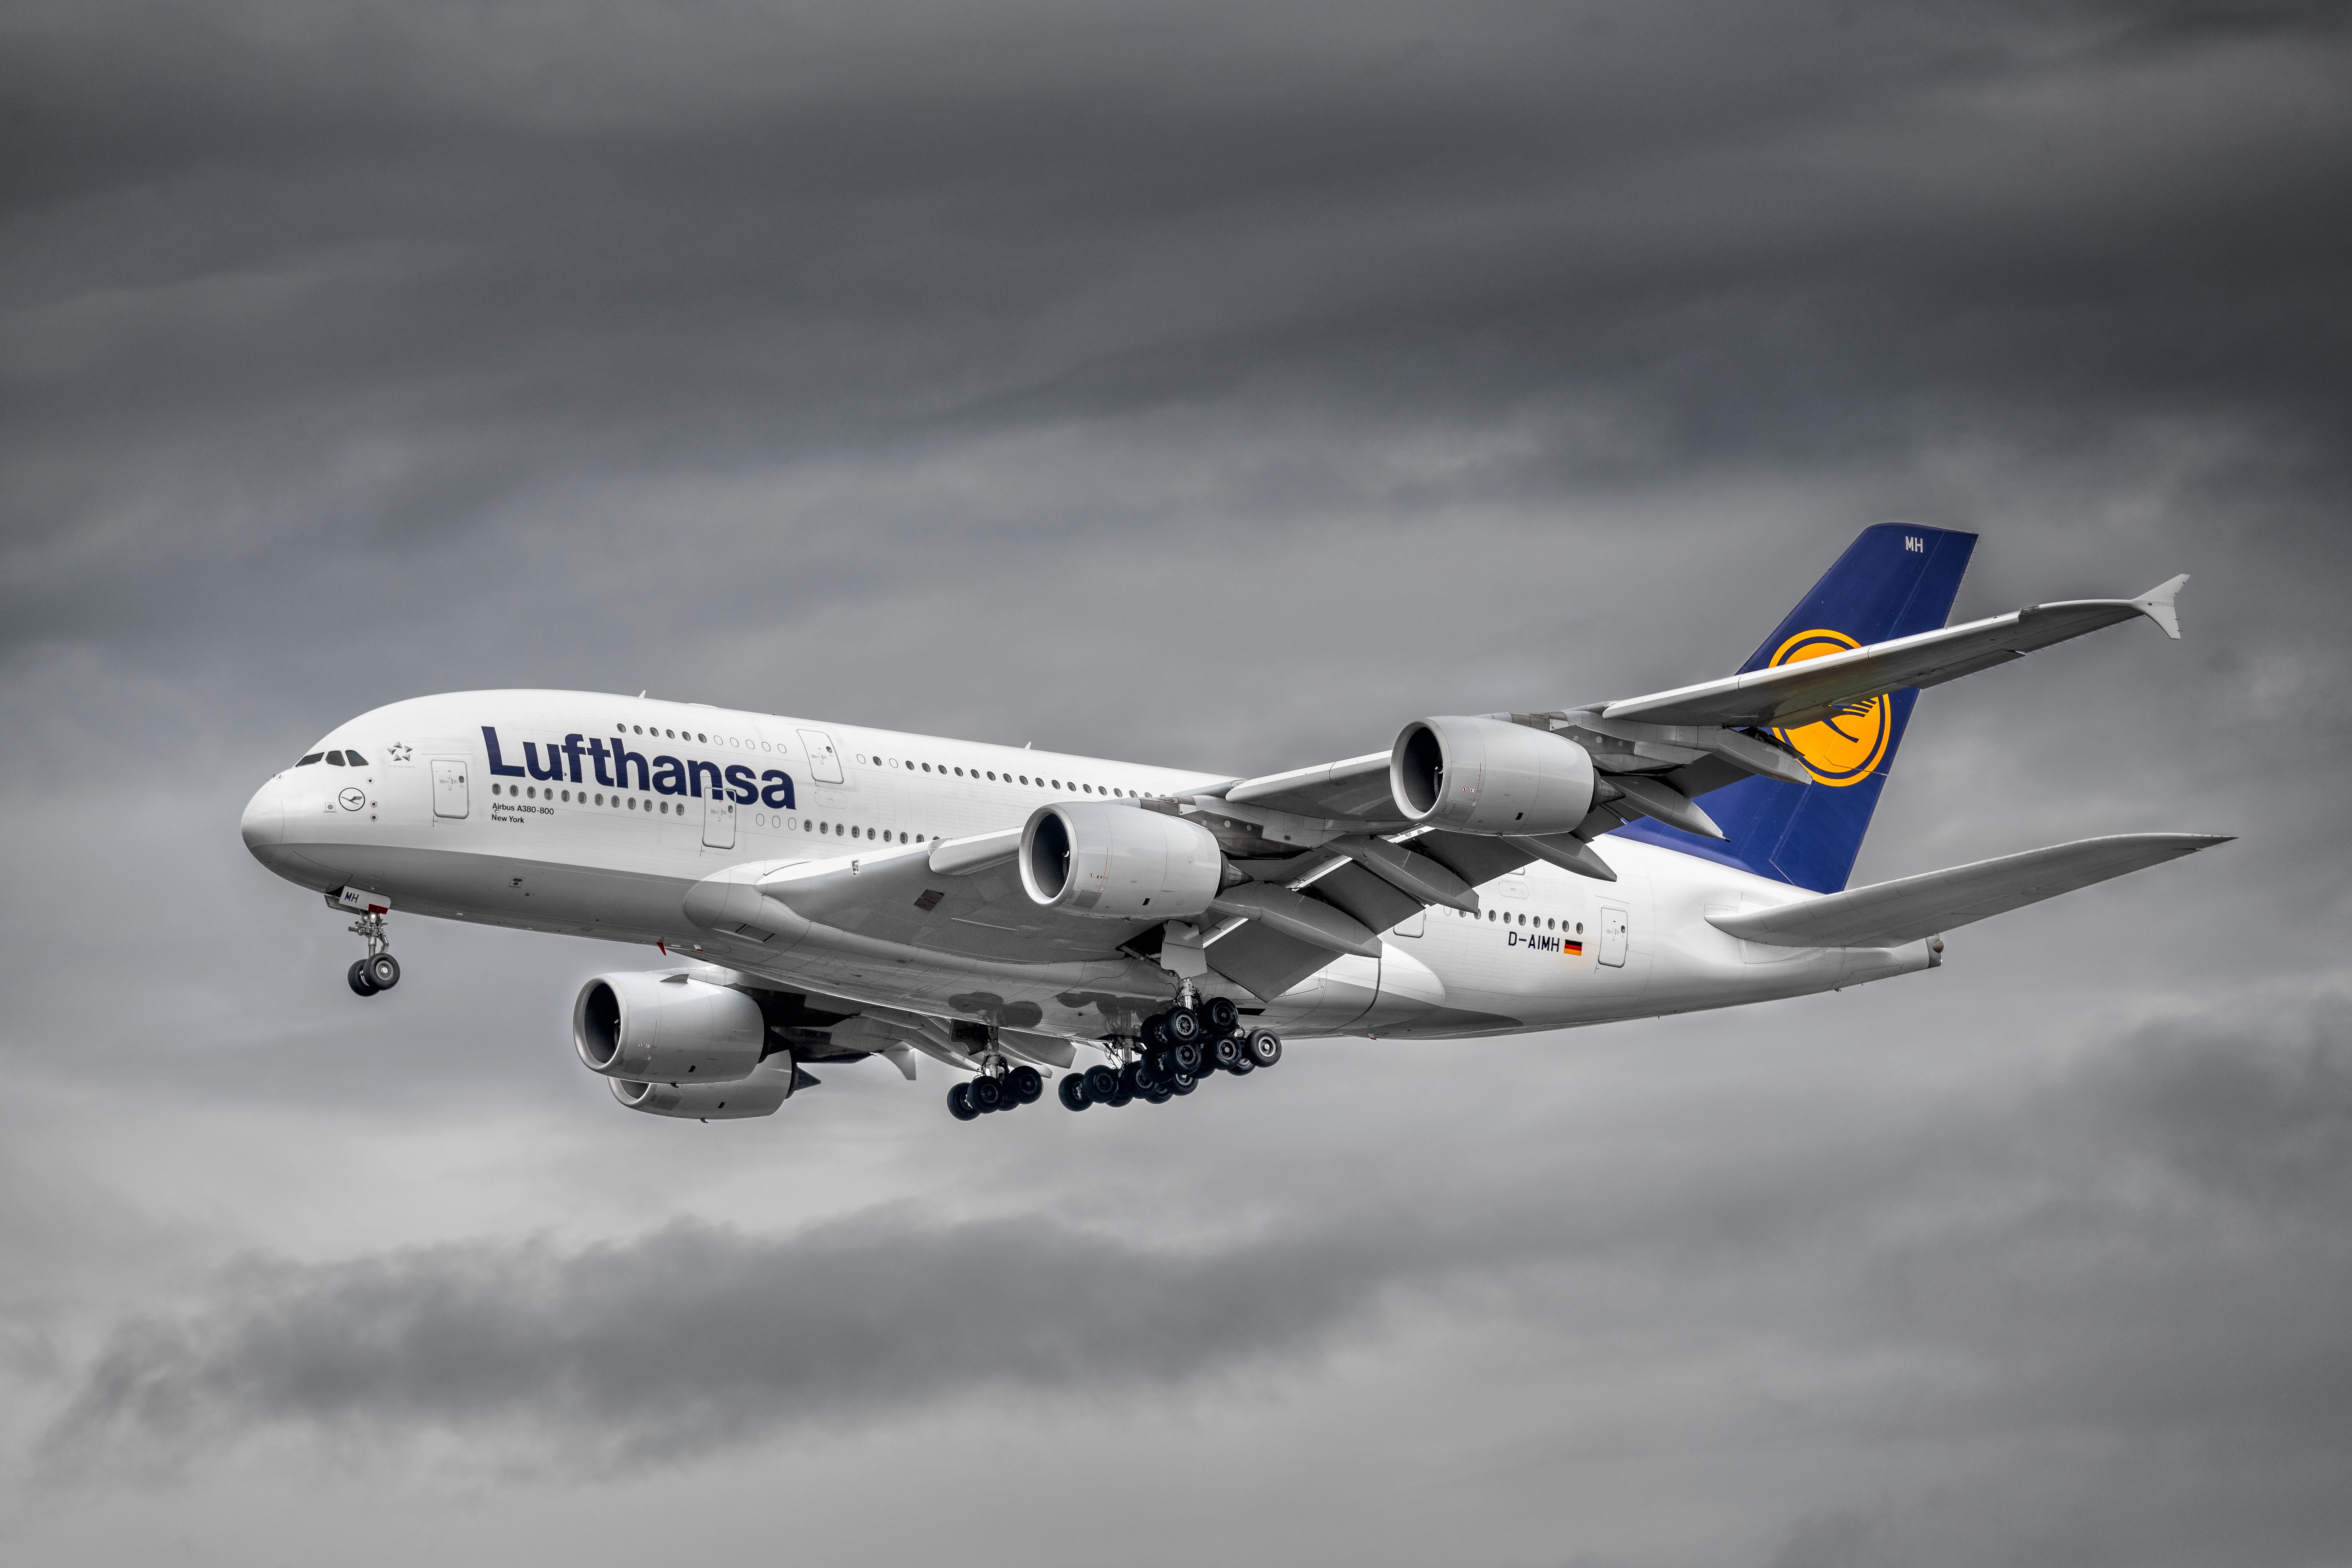 A Lufthansa Airbus A380 Flying in the sky.